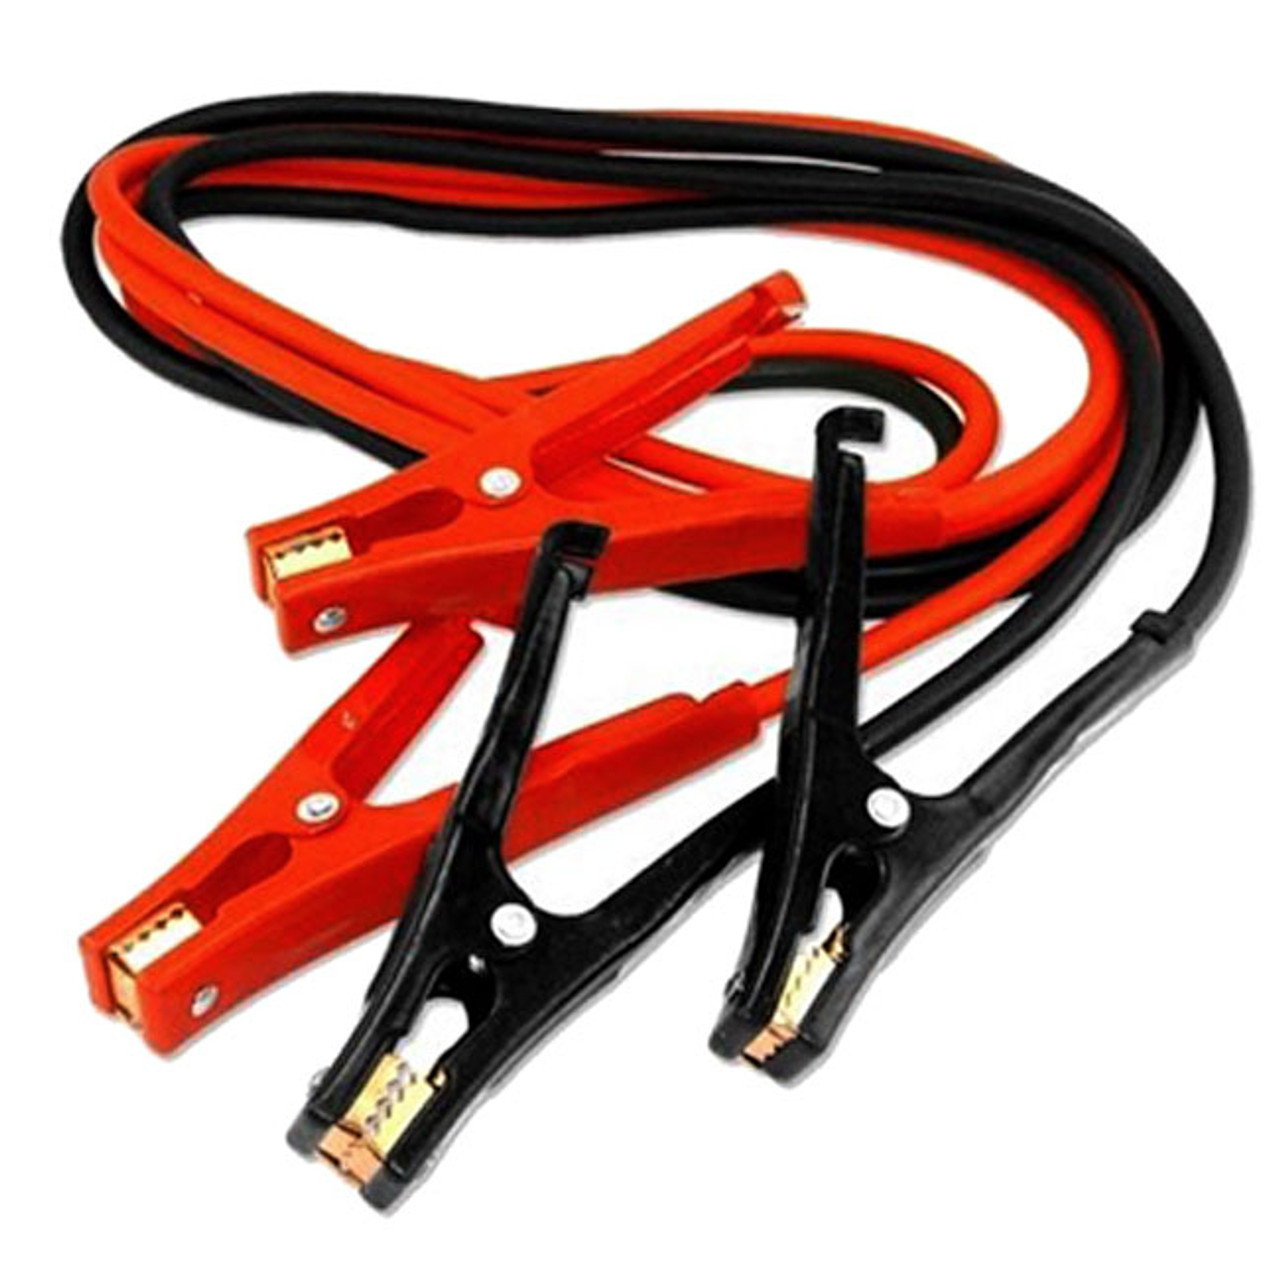 Holdfiturn 6M Booster Cables 3000Amp Heavy Duty Cars Jump Leads